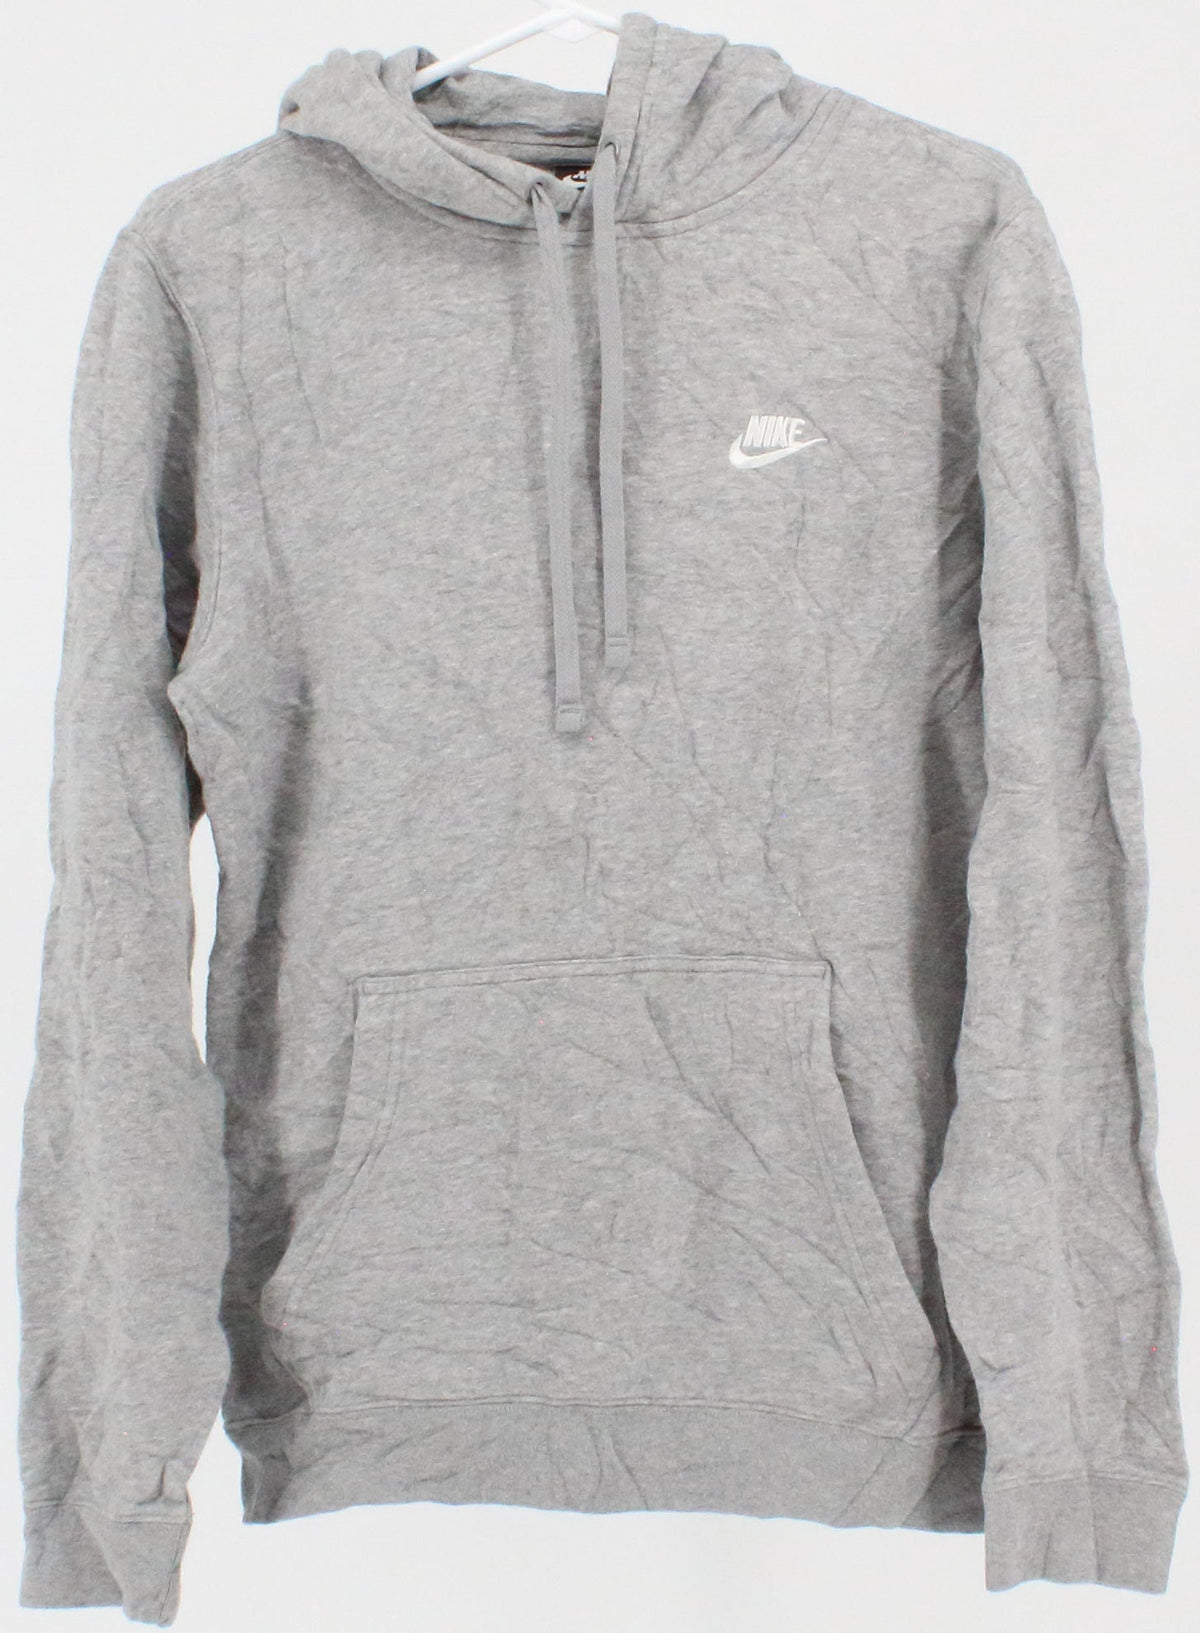 Nike Grey Hooded Sweatshirt With Embroidered White Logo